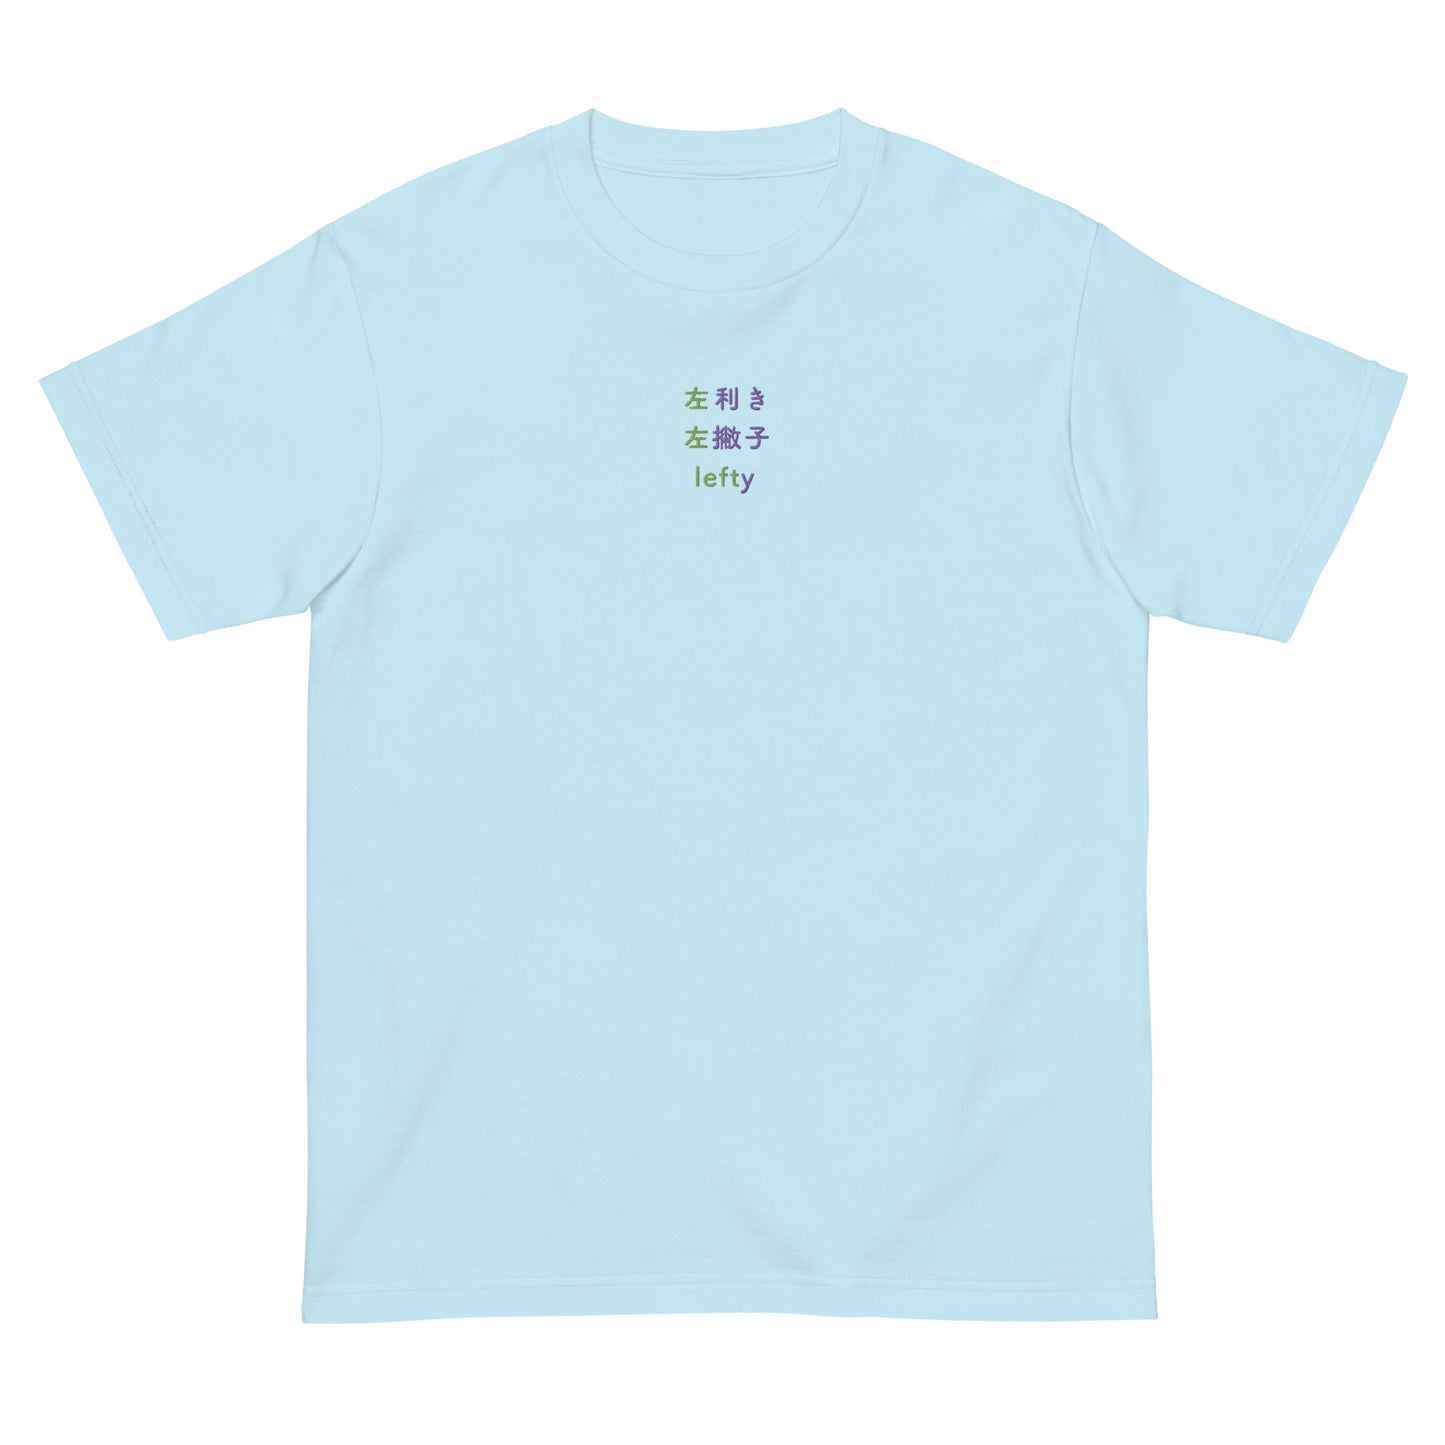 Light Blue High Quality Tee - Front Design with an Green, Purple Embroidery "Lefty" in Japanese,Chinese and English